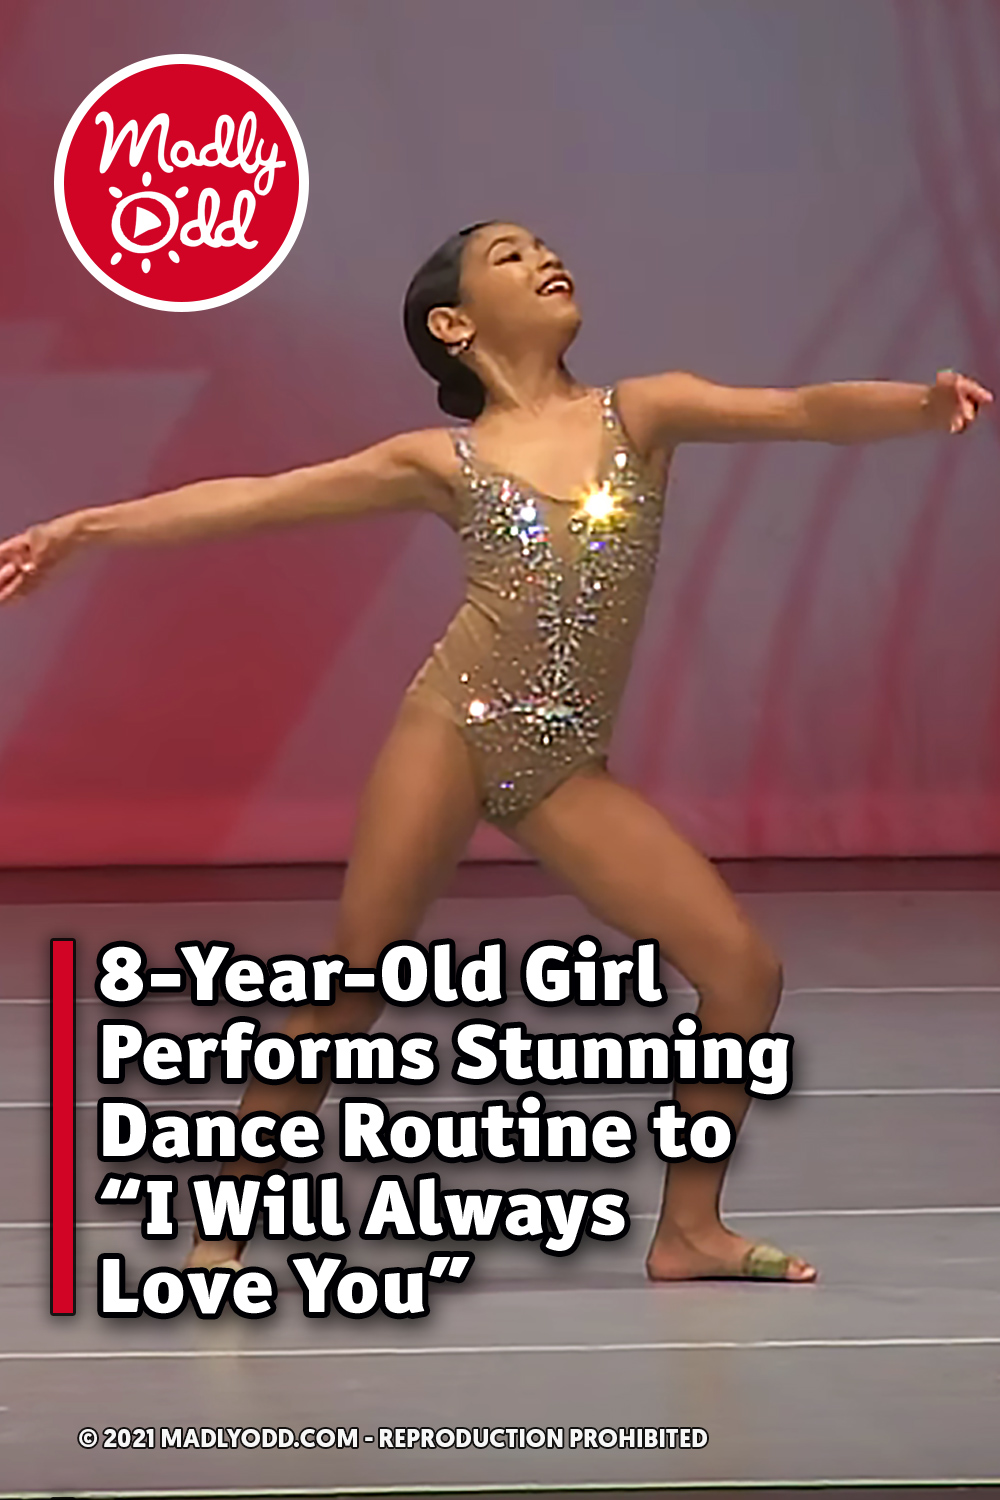 8-Year-Old Girl Performs Stunning Dance Routine to “I Will Always Love You”